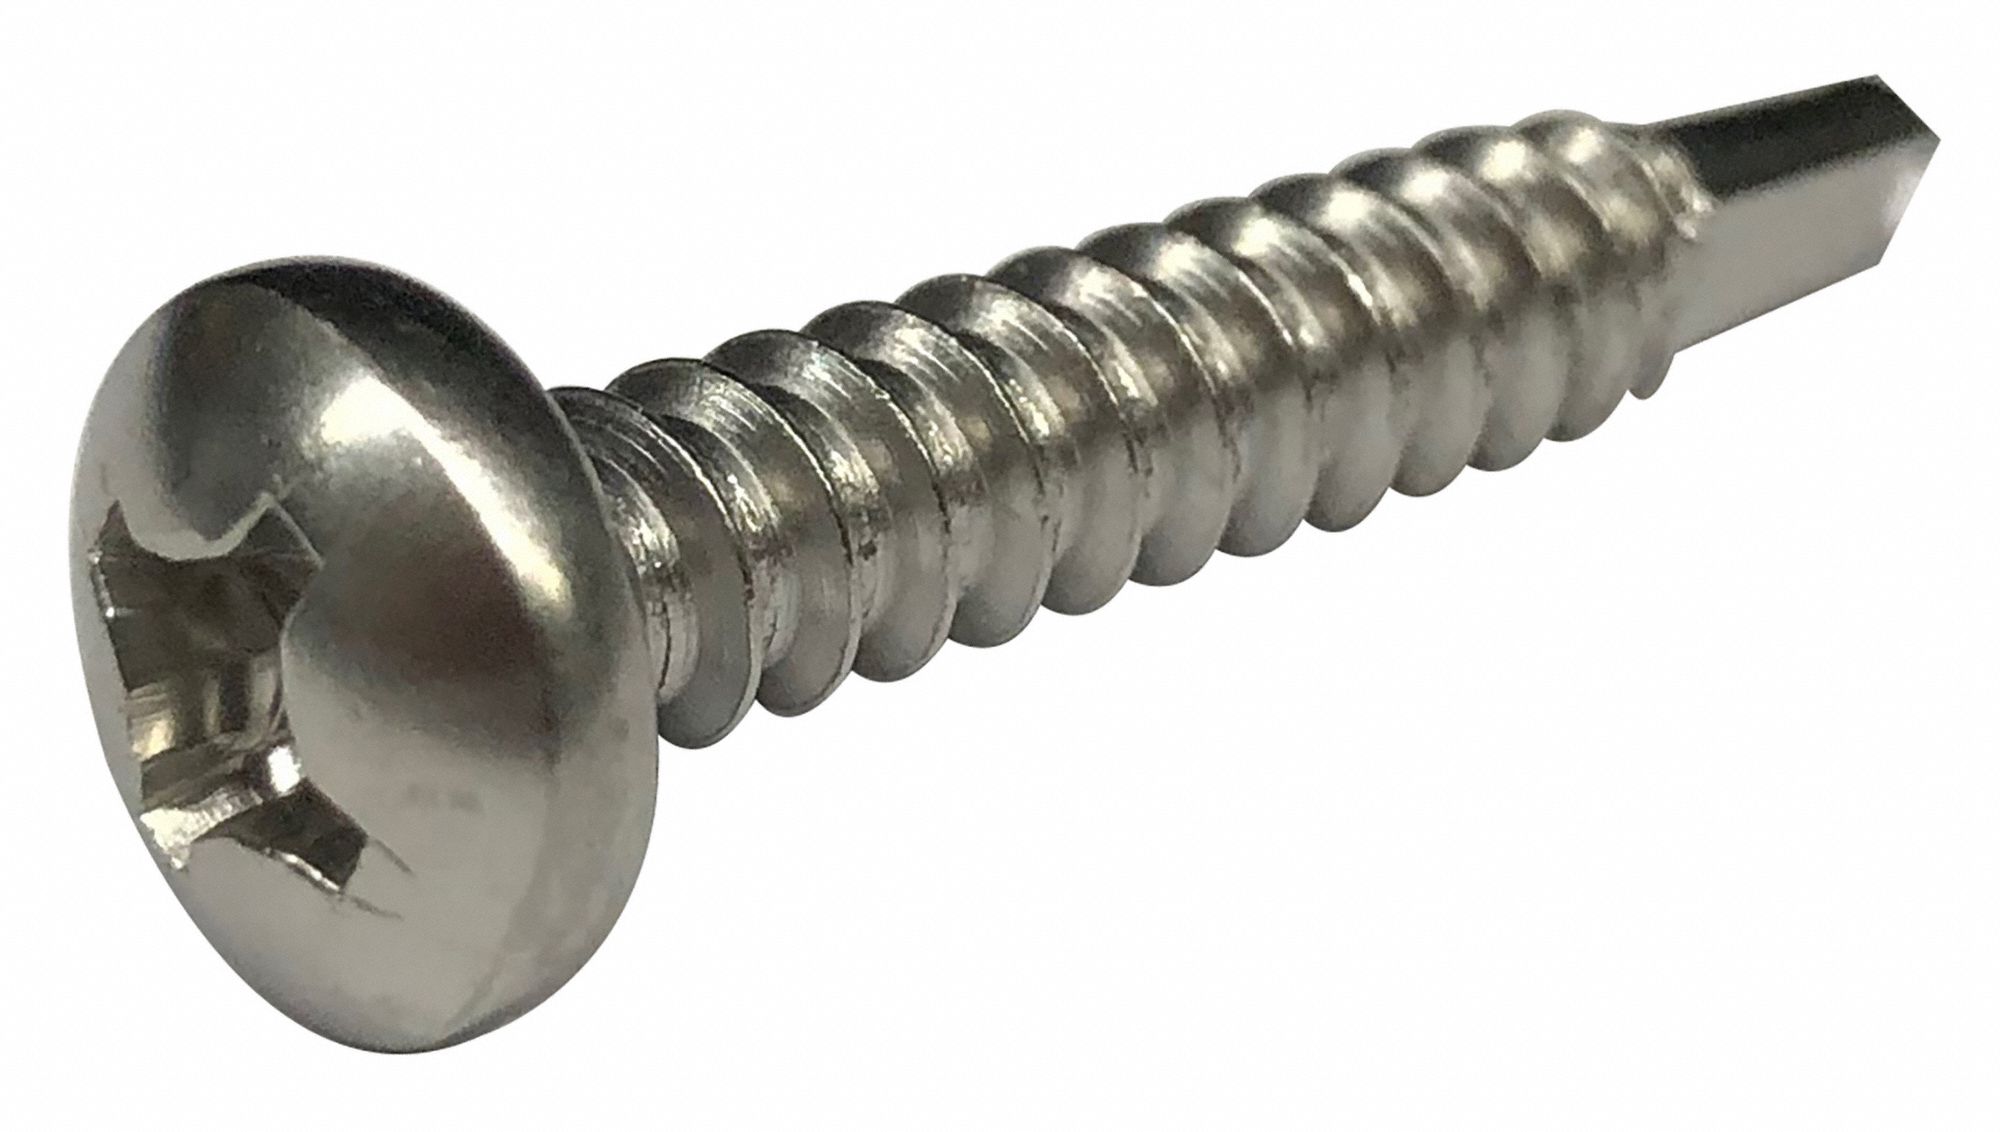 Pan Head Type F 5/8 Length Steel Thread Cutting Screw Star Drive 5/16-18 Thread Size Pack of 10 Zinc Plated Finish 